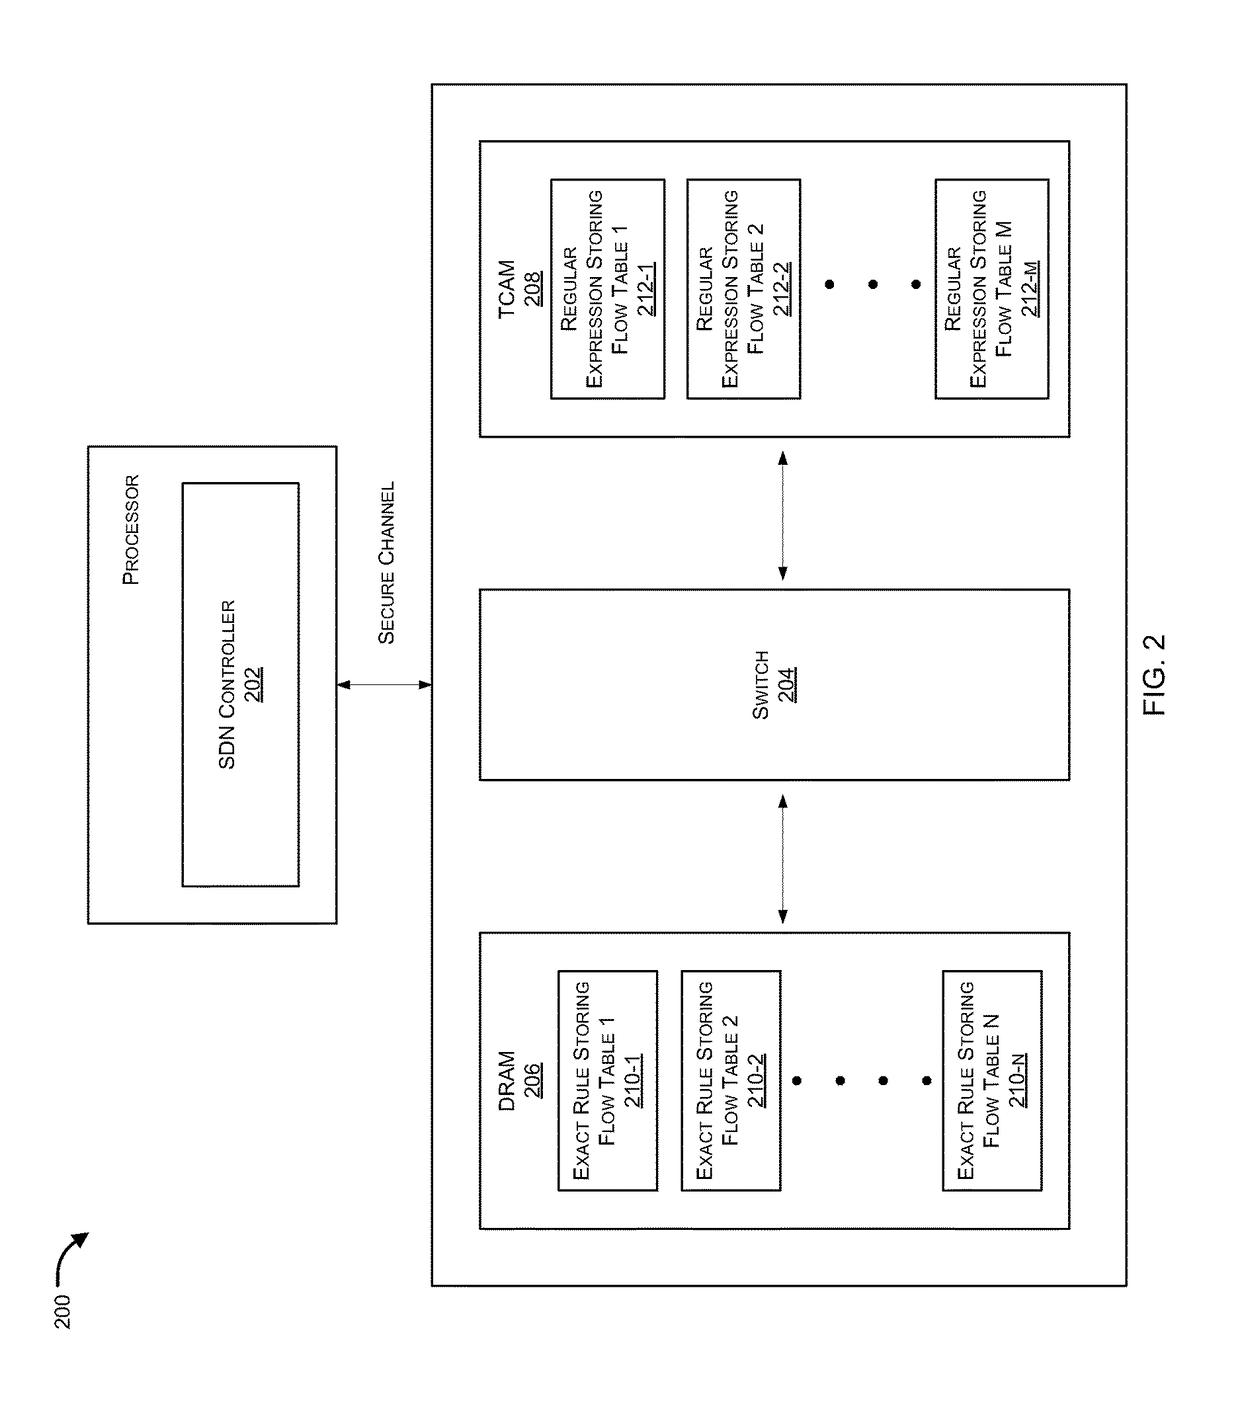 Flexible pipeline architecture for multi-table flow processing